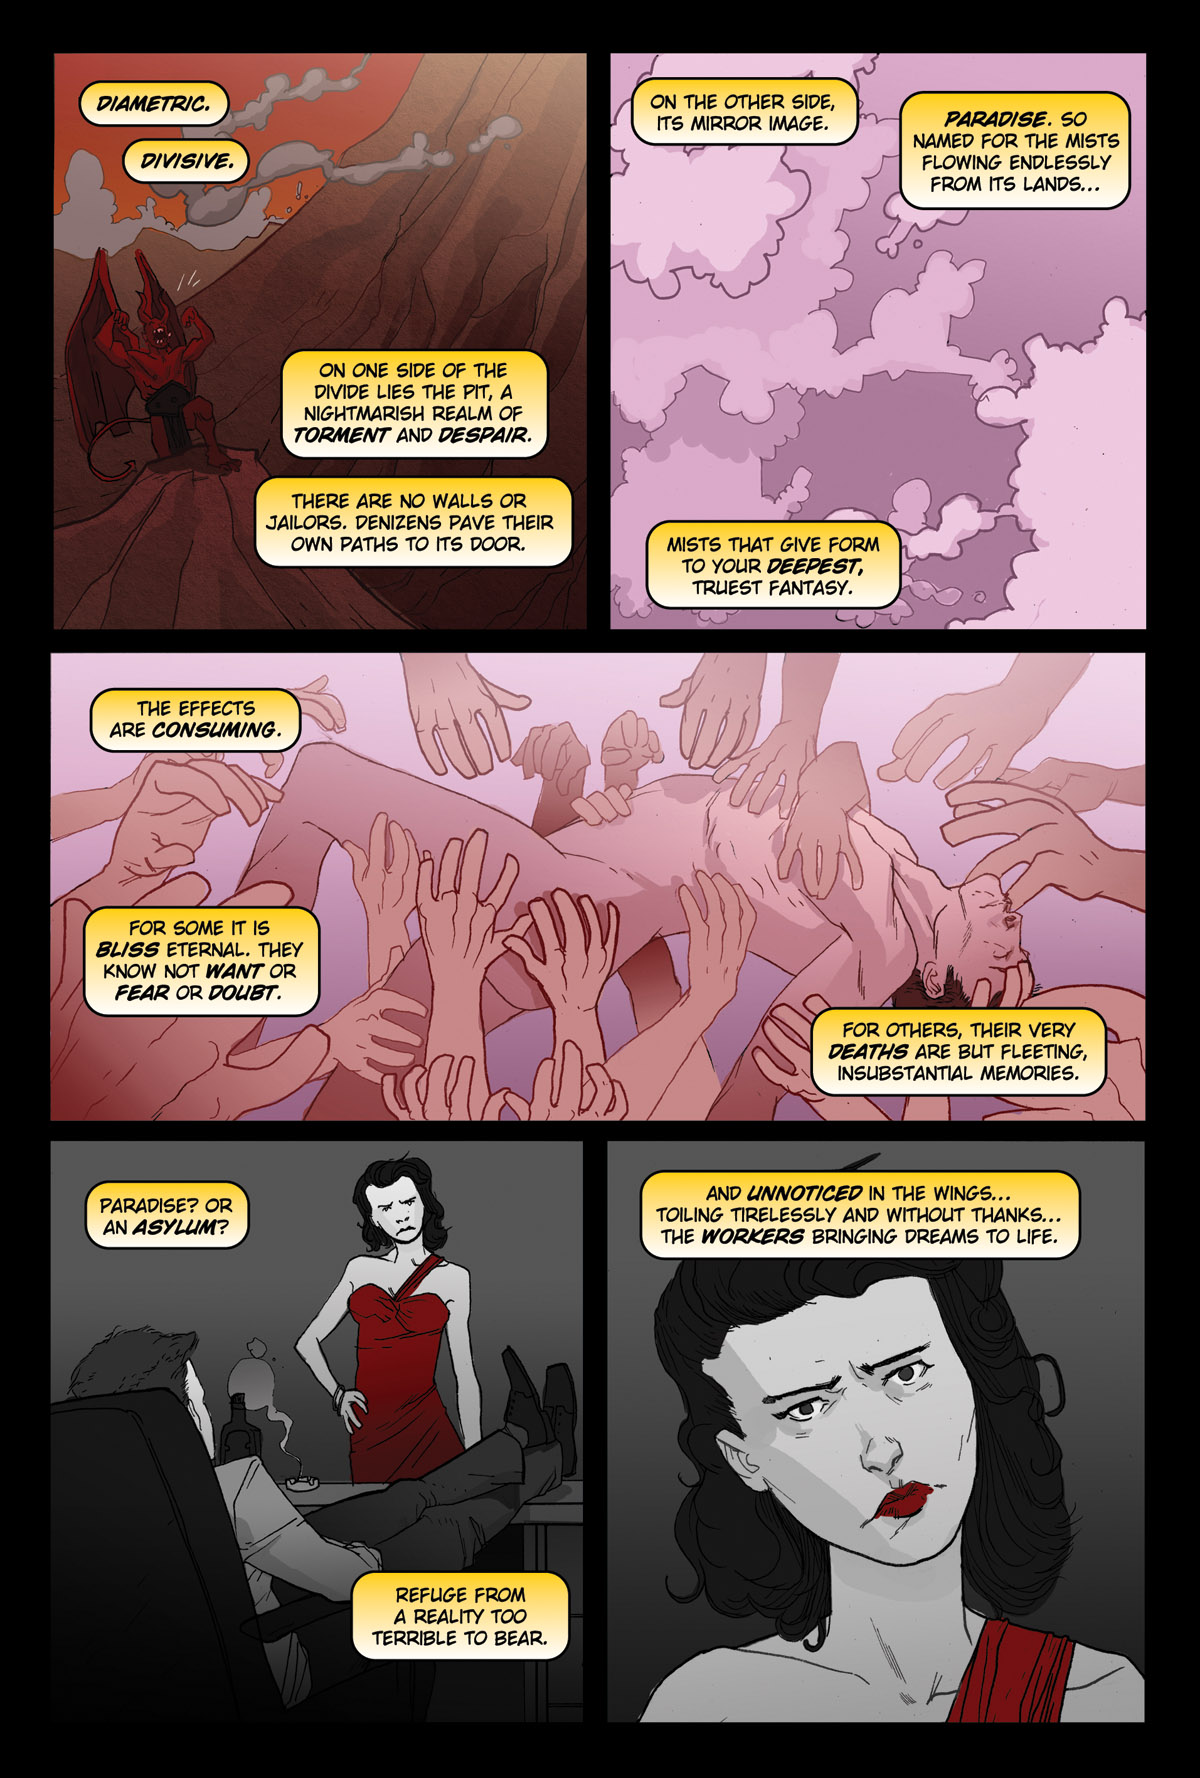 Afterlife Inc. | On High | Page 2